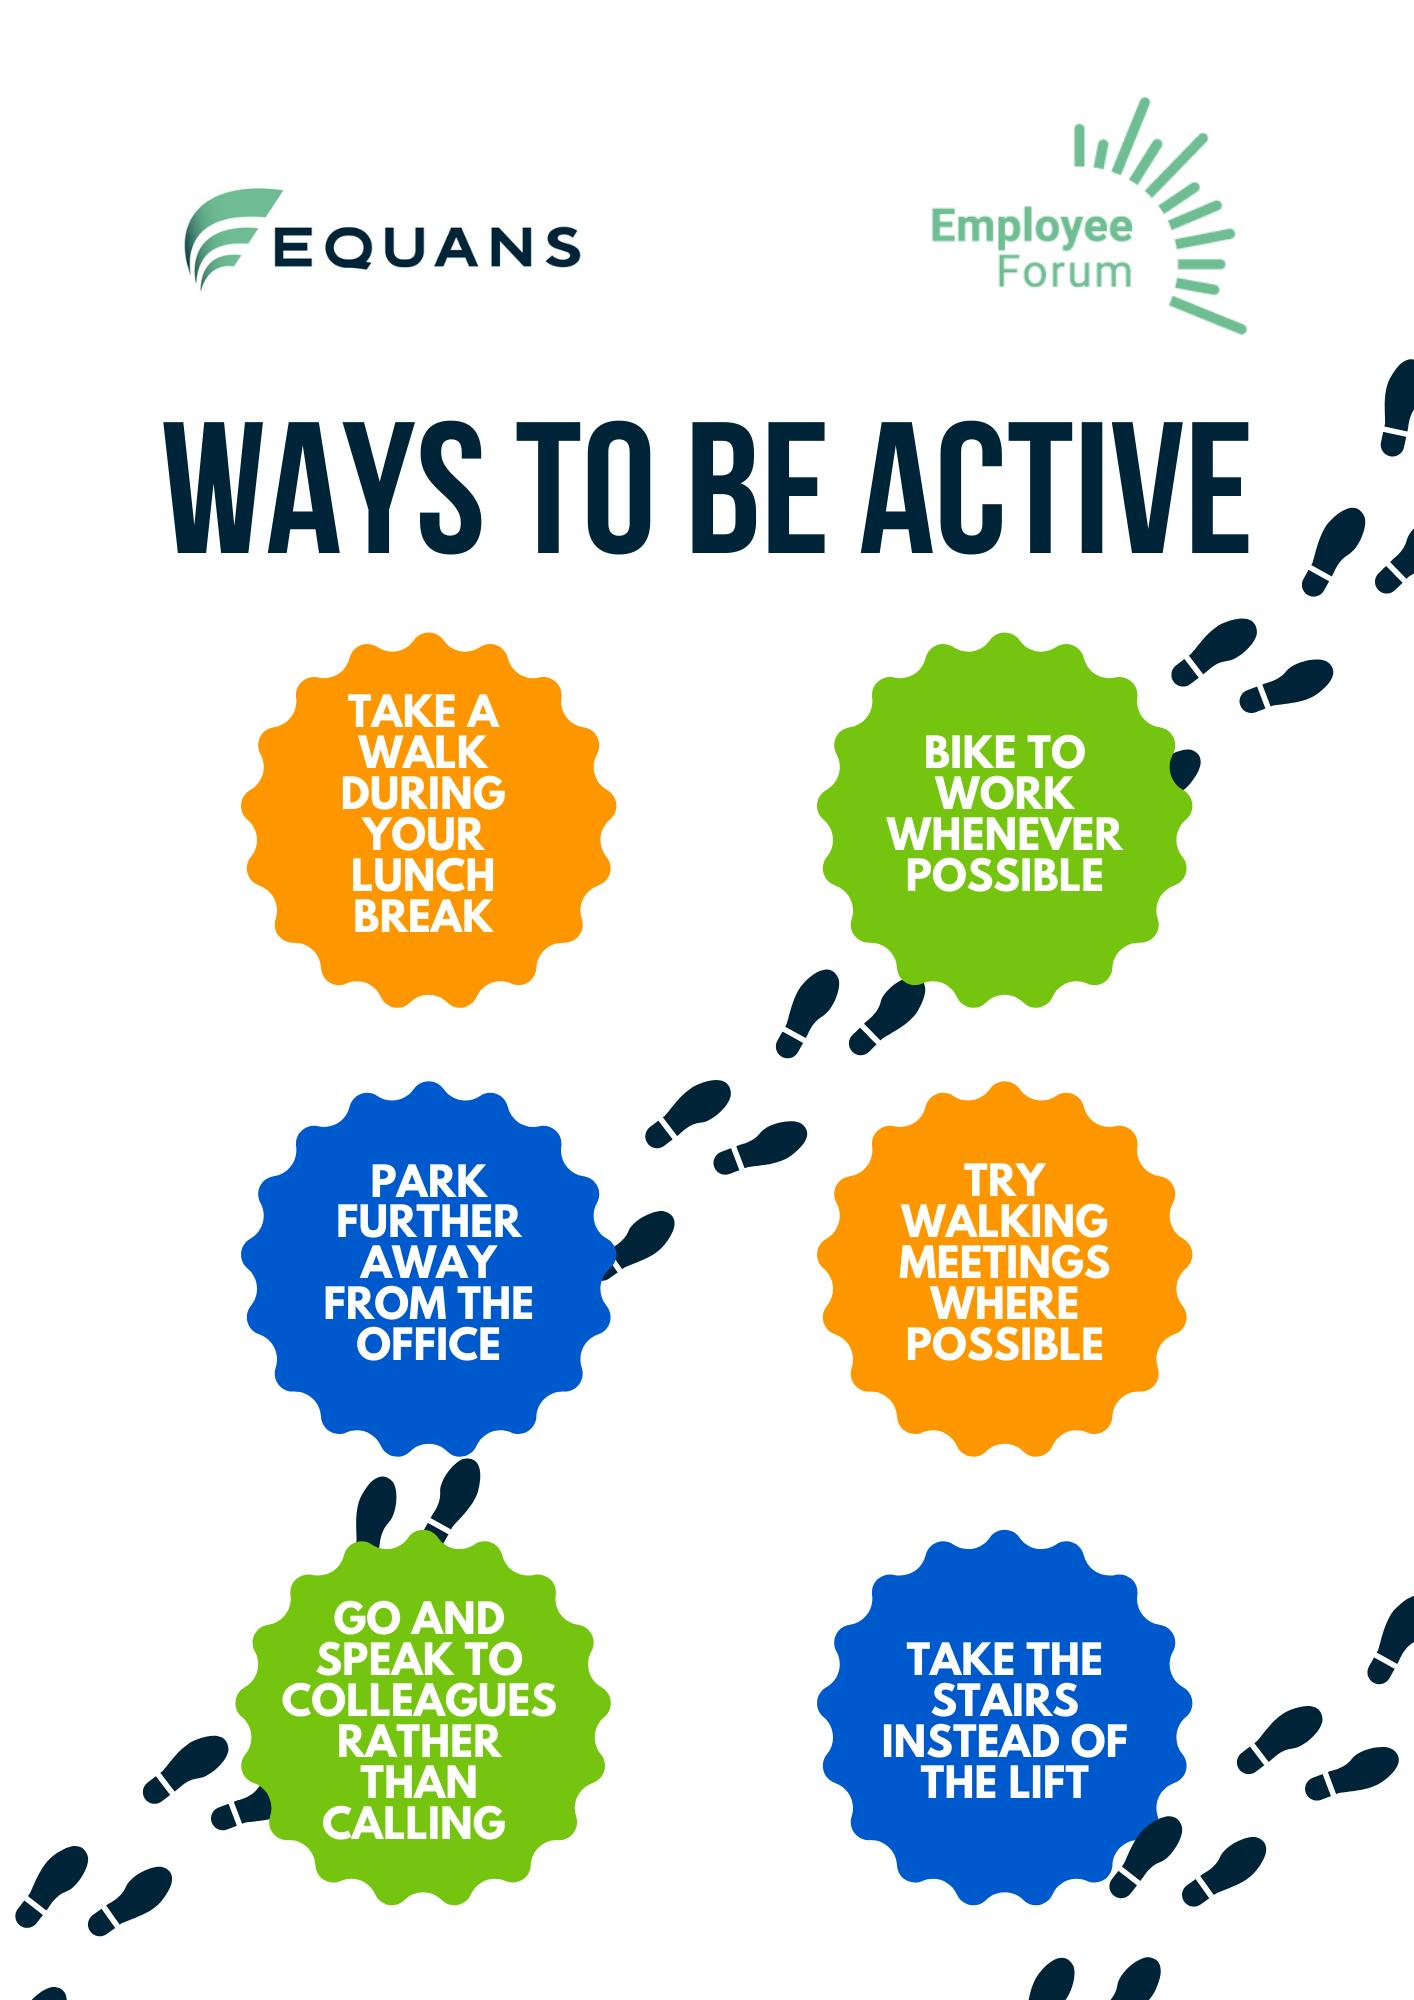 Ways to be active